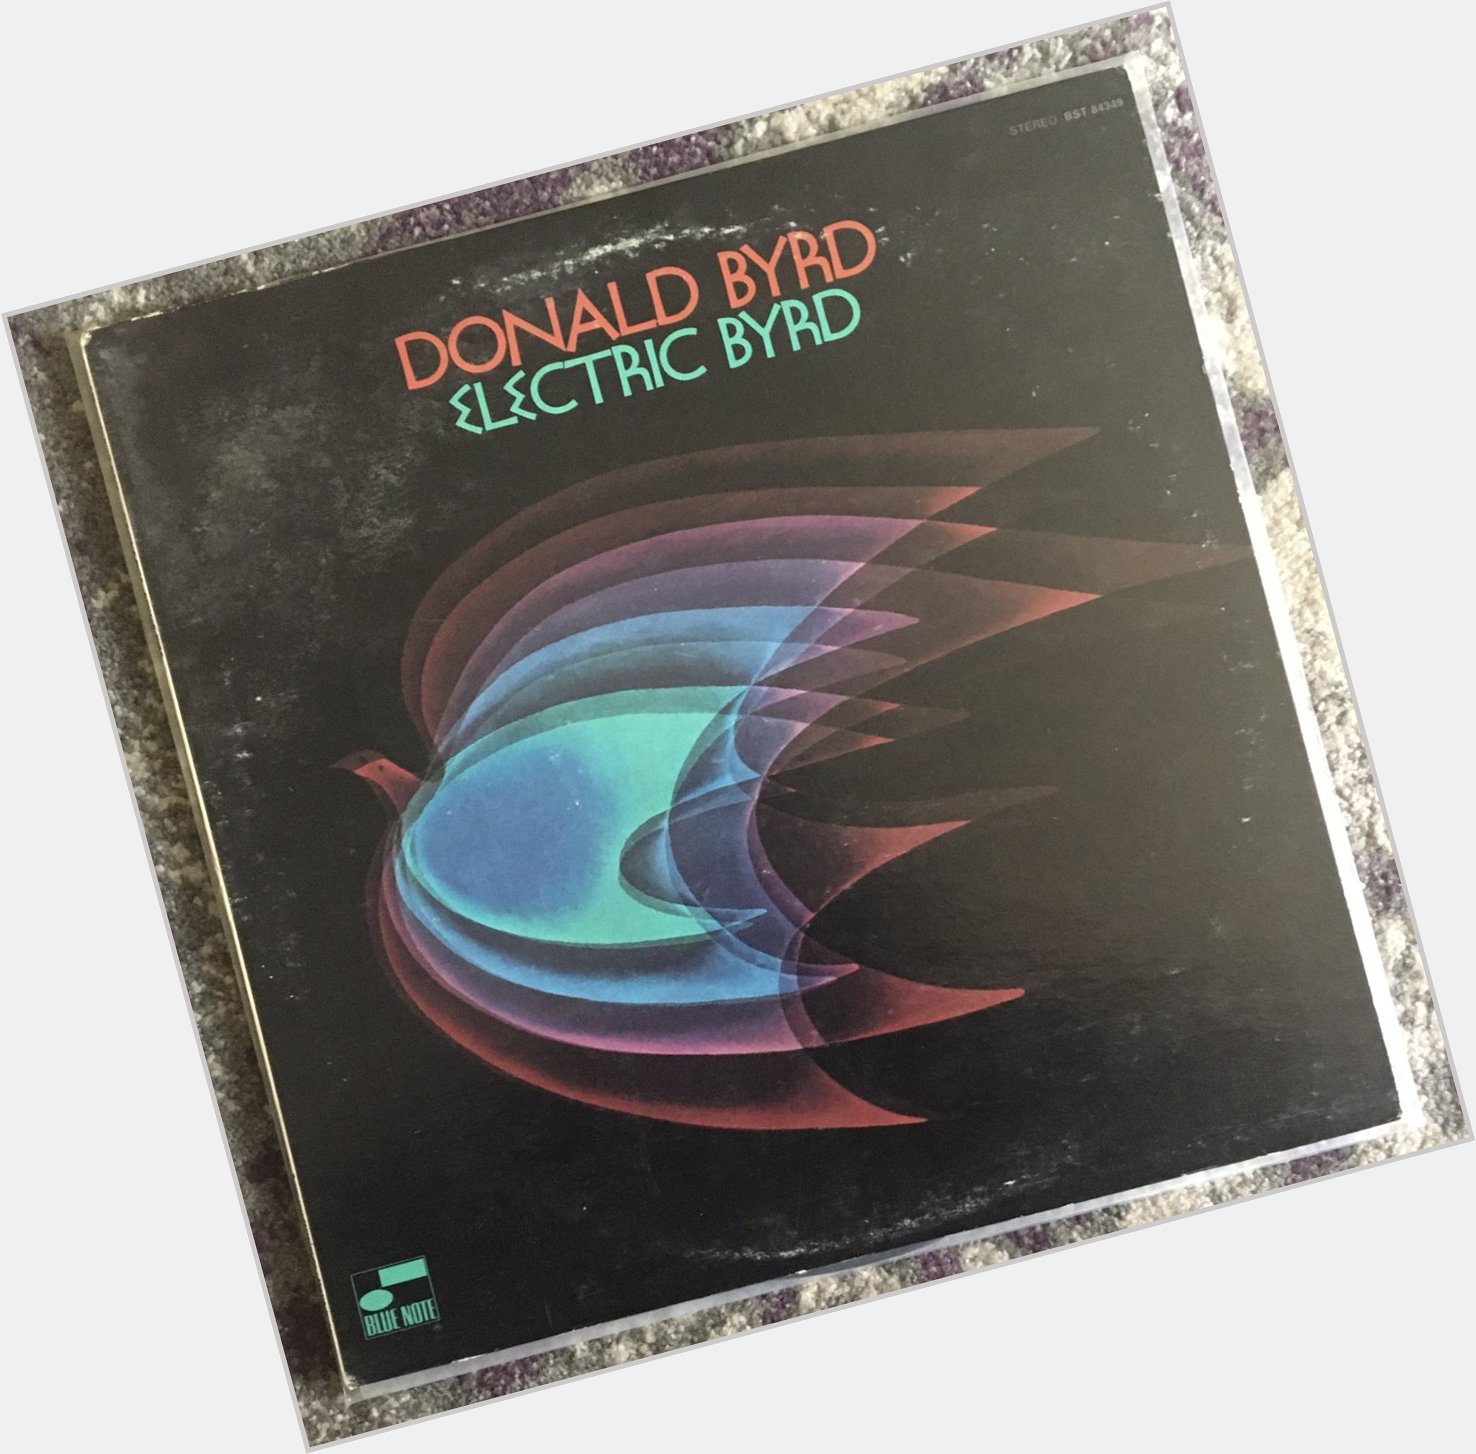 Also happy birthday to Donald Byrd. RIP Donald. 